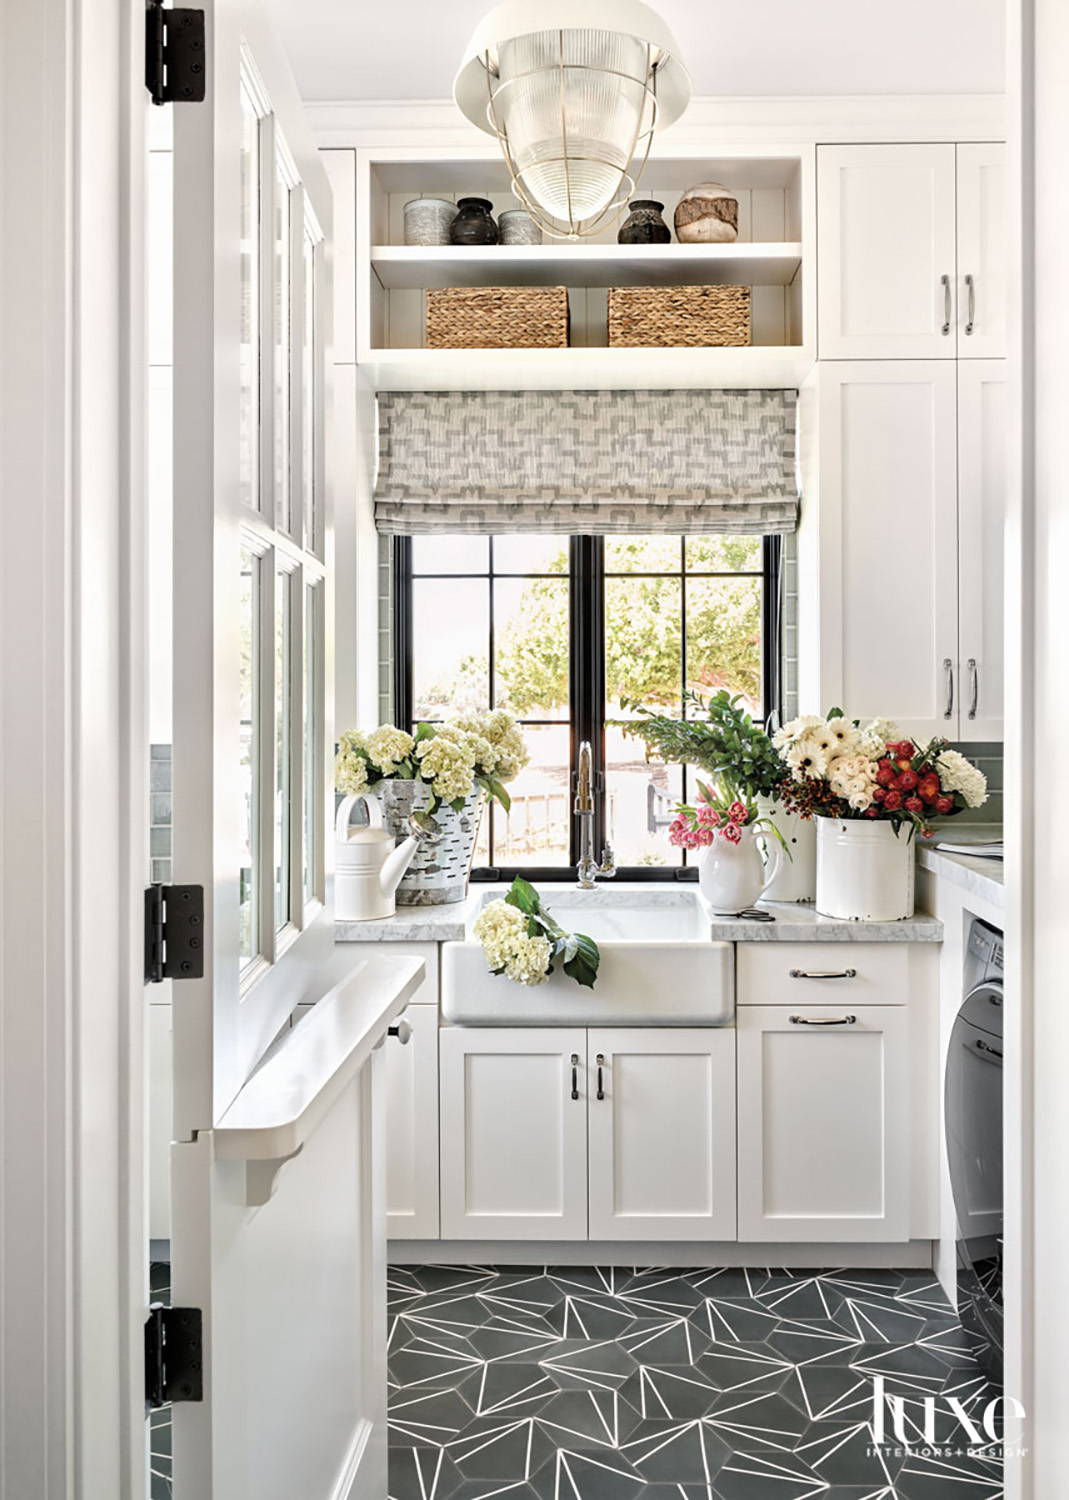 A laundry with gray-tile geometric floor, white cabinetry and a farmhouse sink.